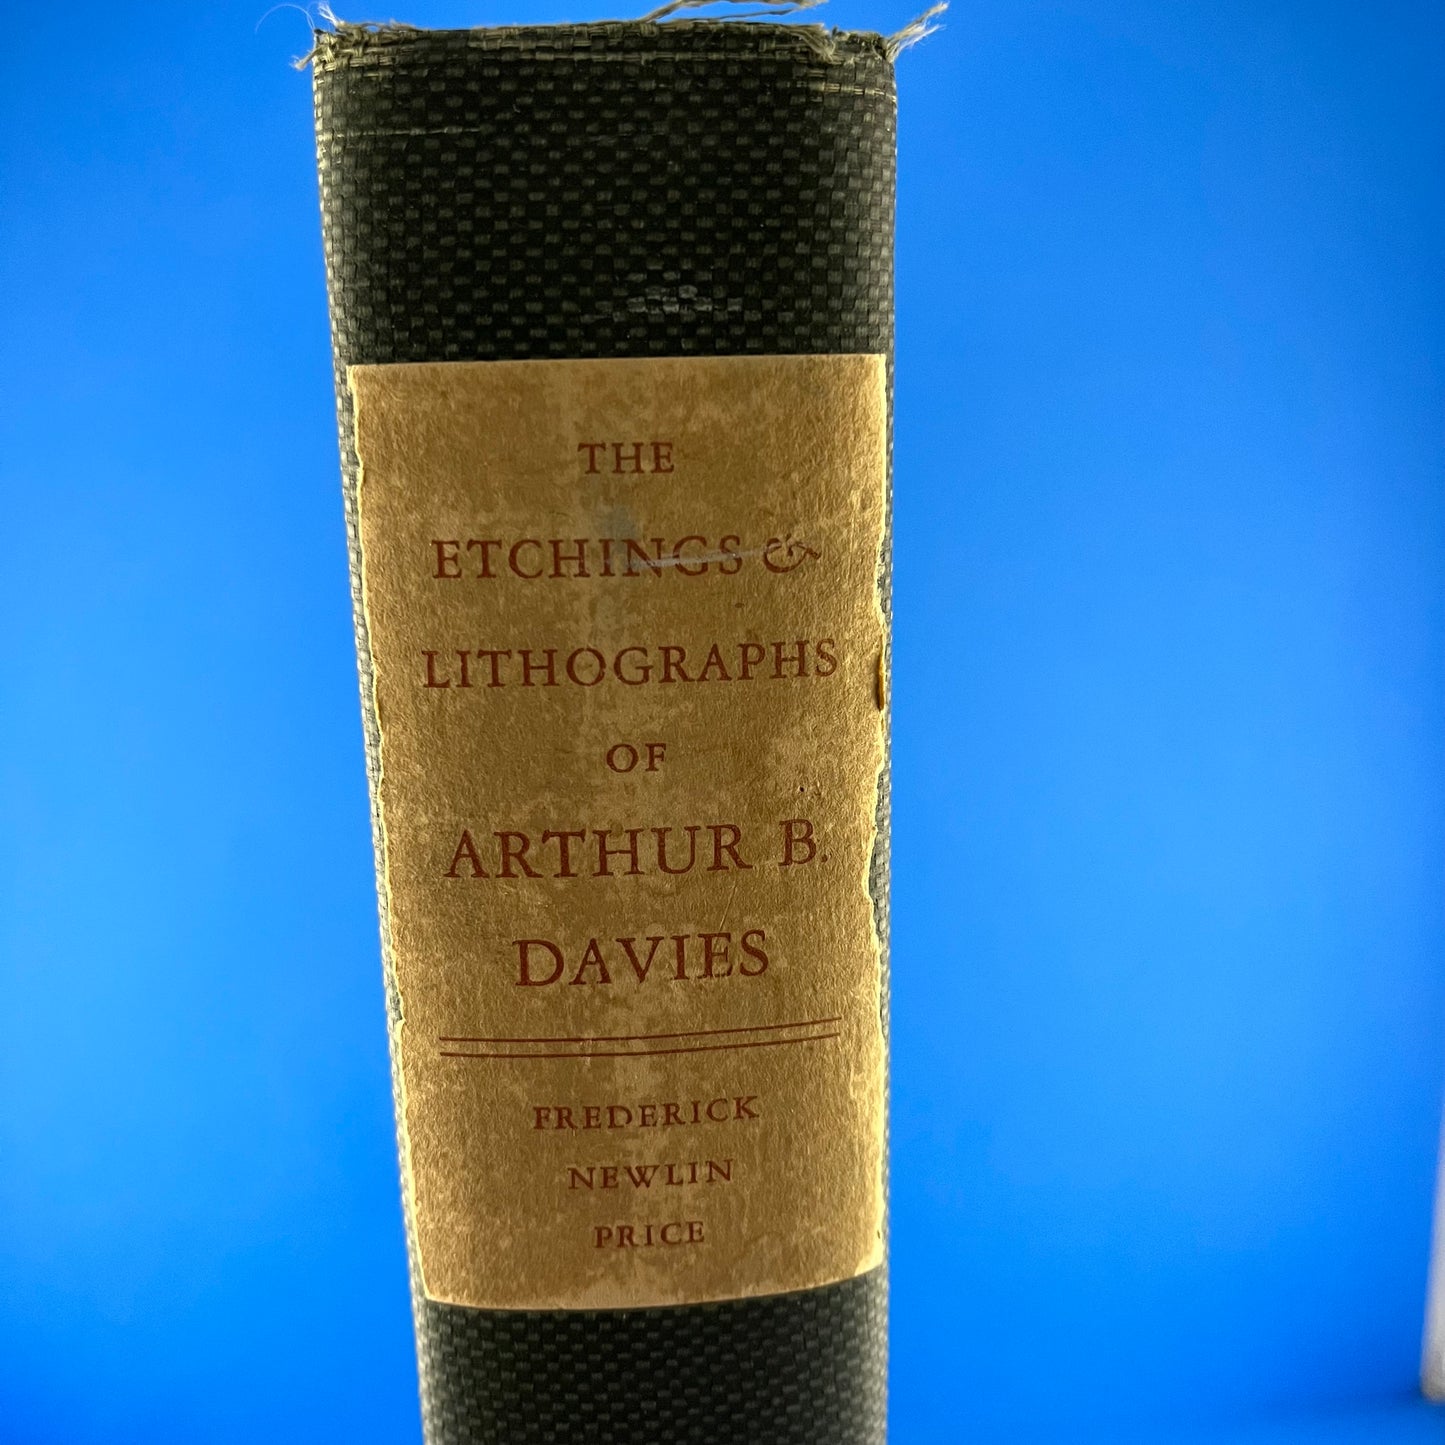 The Etchings and Lithographs of Arthur B. Davies